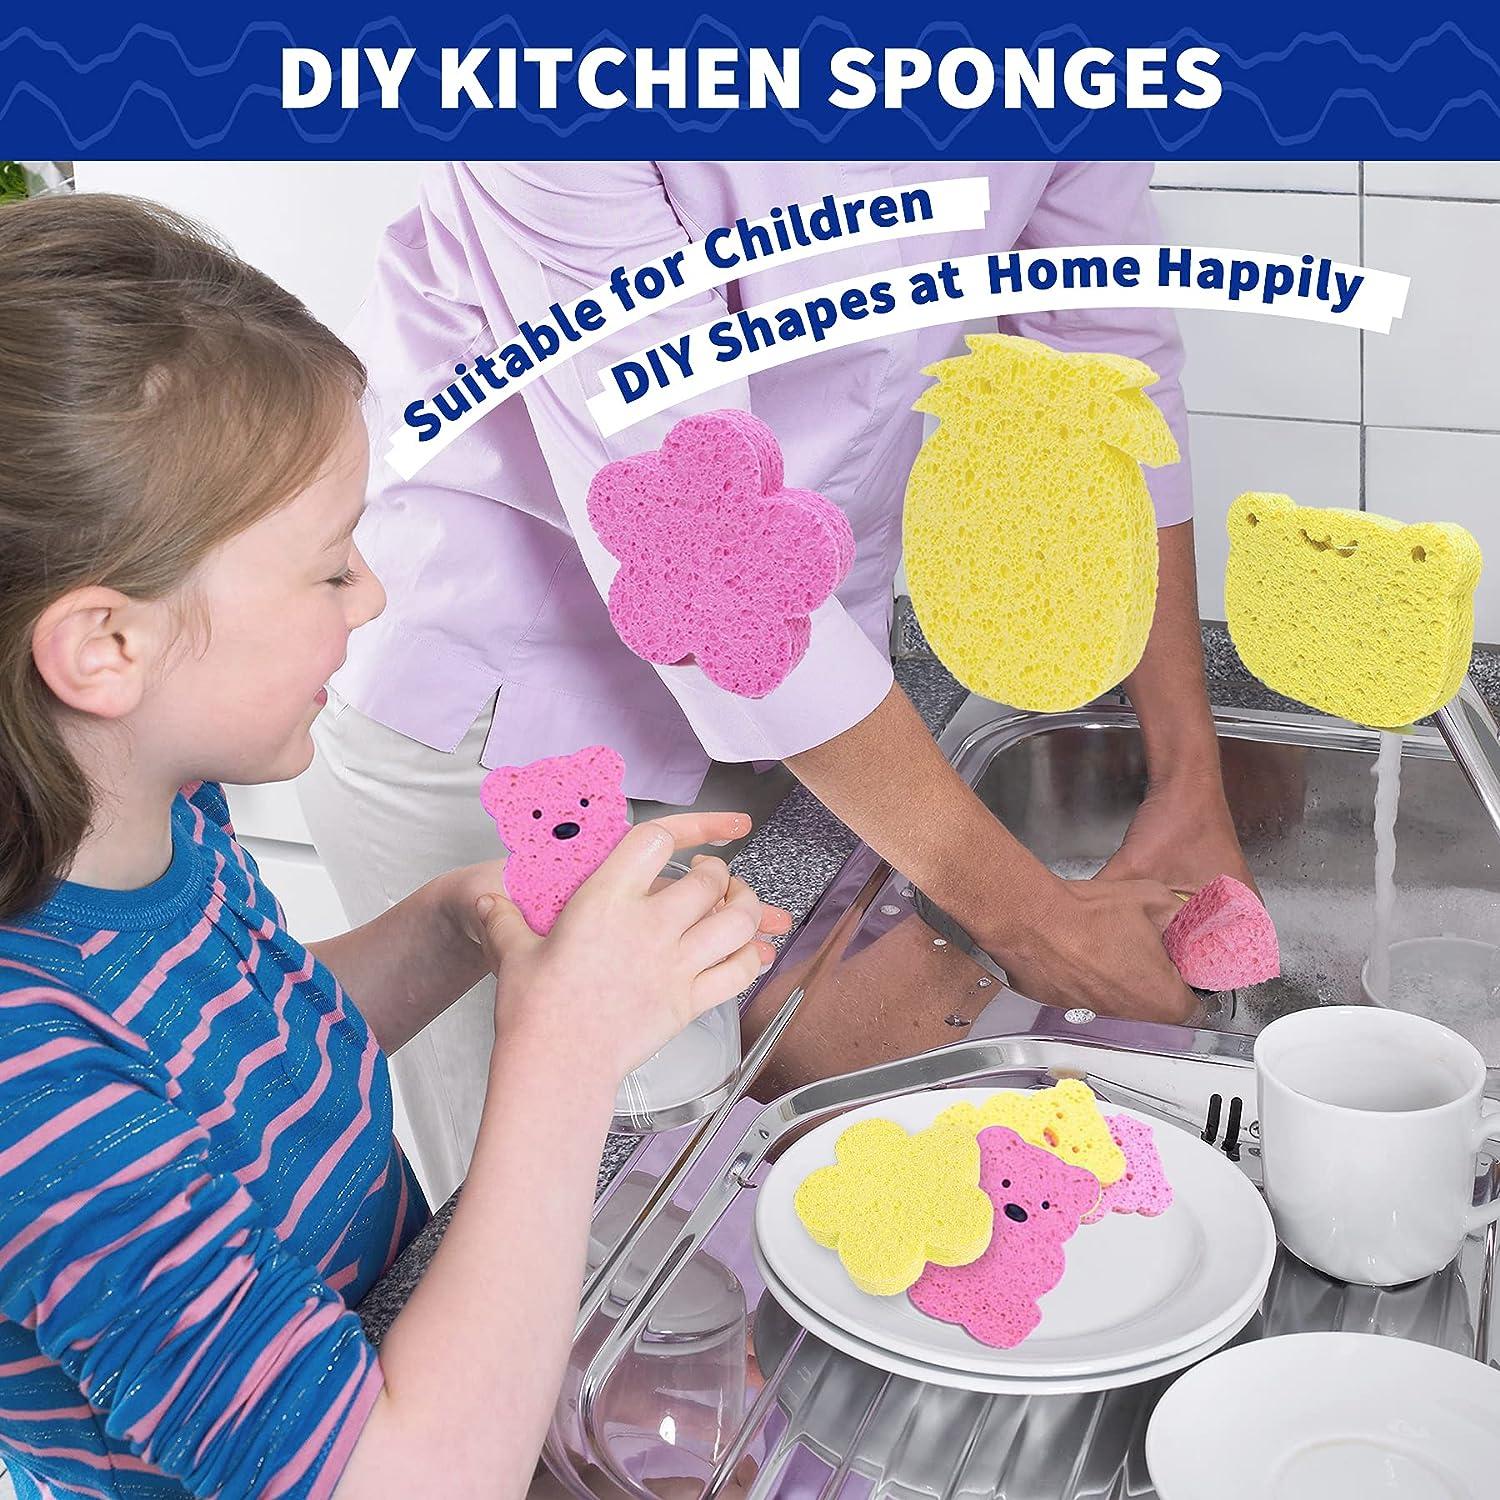 CELOX 24 Pack Large Sponges for Kitchen, Handy Sponges for Dishes